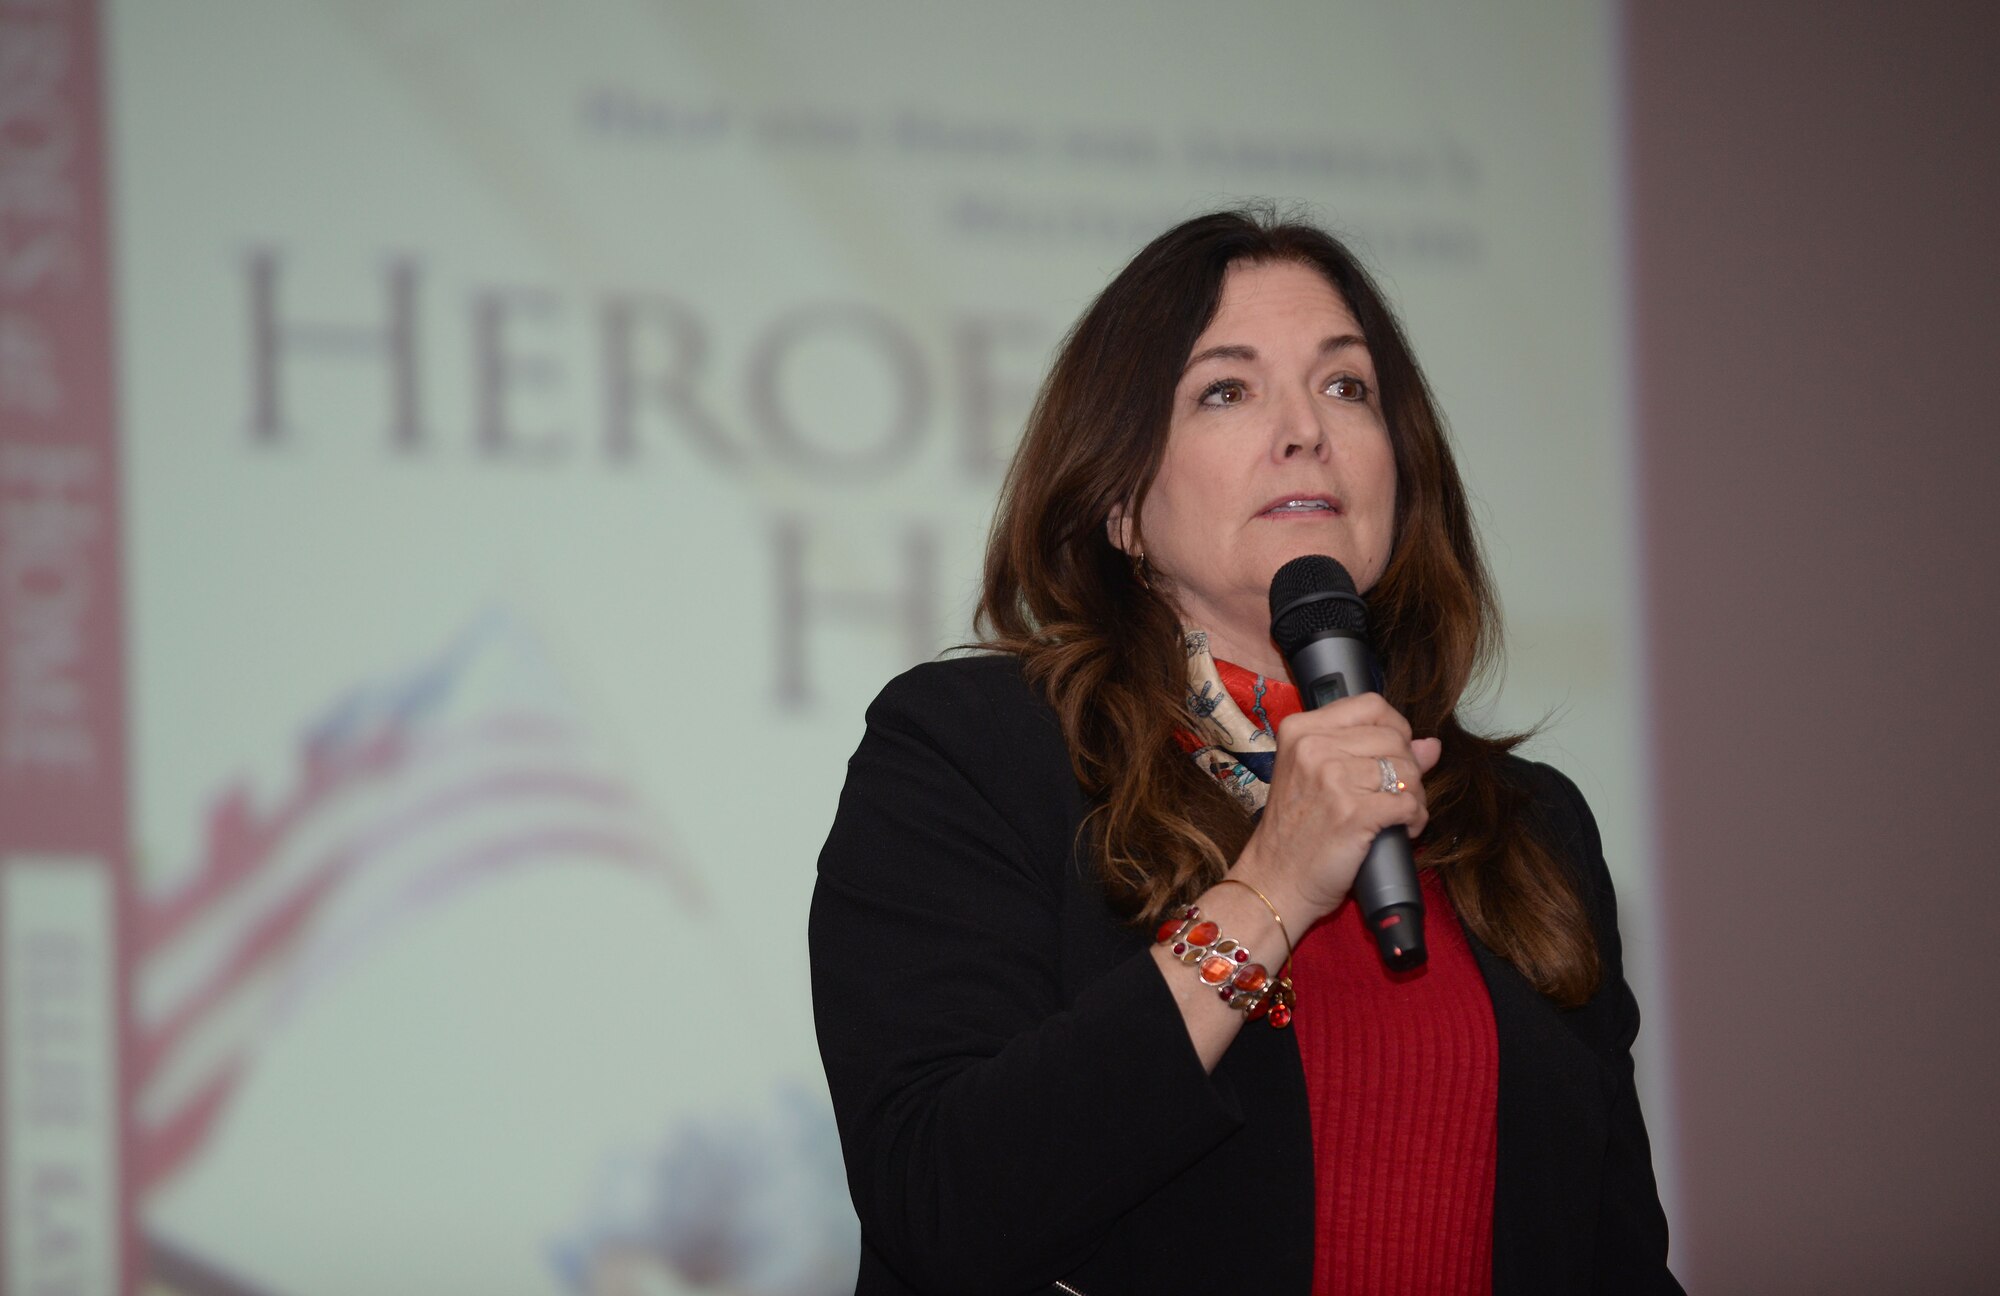 Ellie Kay, a best-selling author of 15 books, speaks to Airmen and their families about financial education in the base theatre on RAF Mildenhall, England, May 2, 2017. Kay visited RAF Mildenhall with her “Heroes at Home” tour in order to assist military families with financial management and planning. (U.S. Air Force photo by Airman 1st Class Luke Milano)